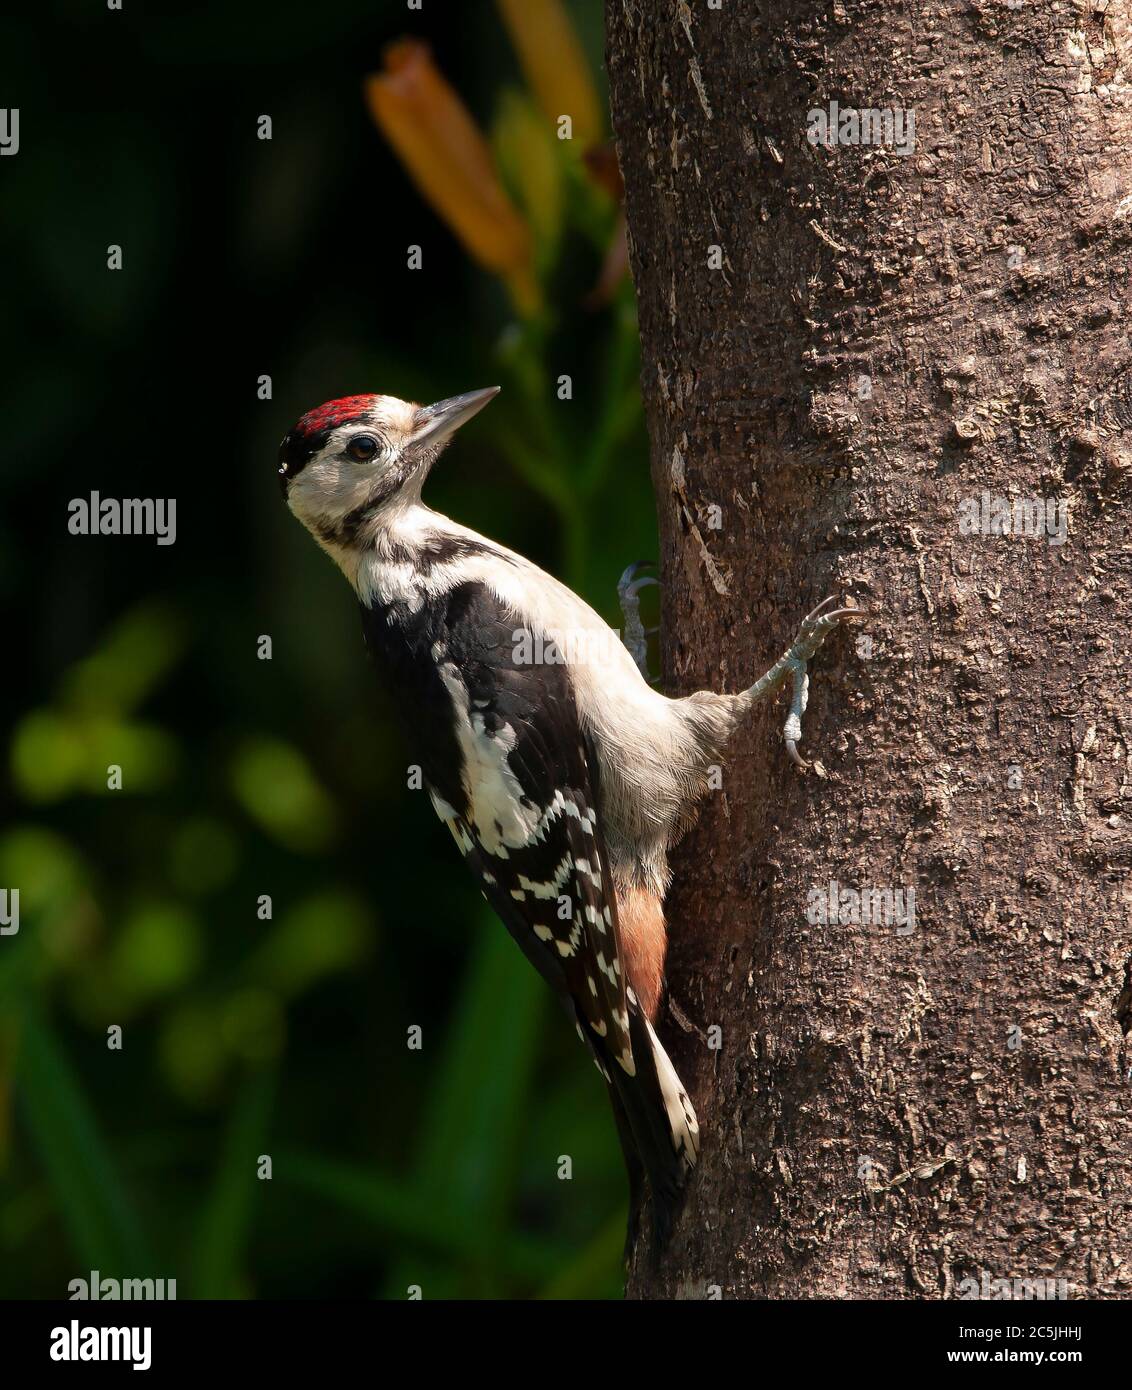 Juvenile Great Spotted Woodpecker on home made tree trunk suet feeder, photographed in my garden Stock Photo